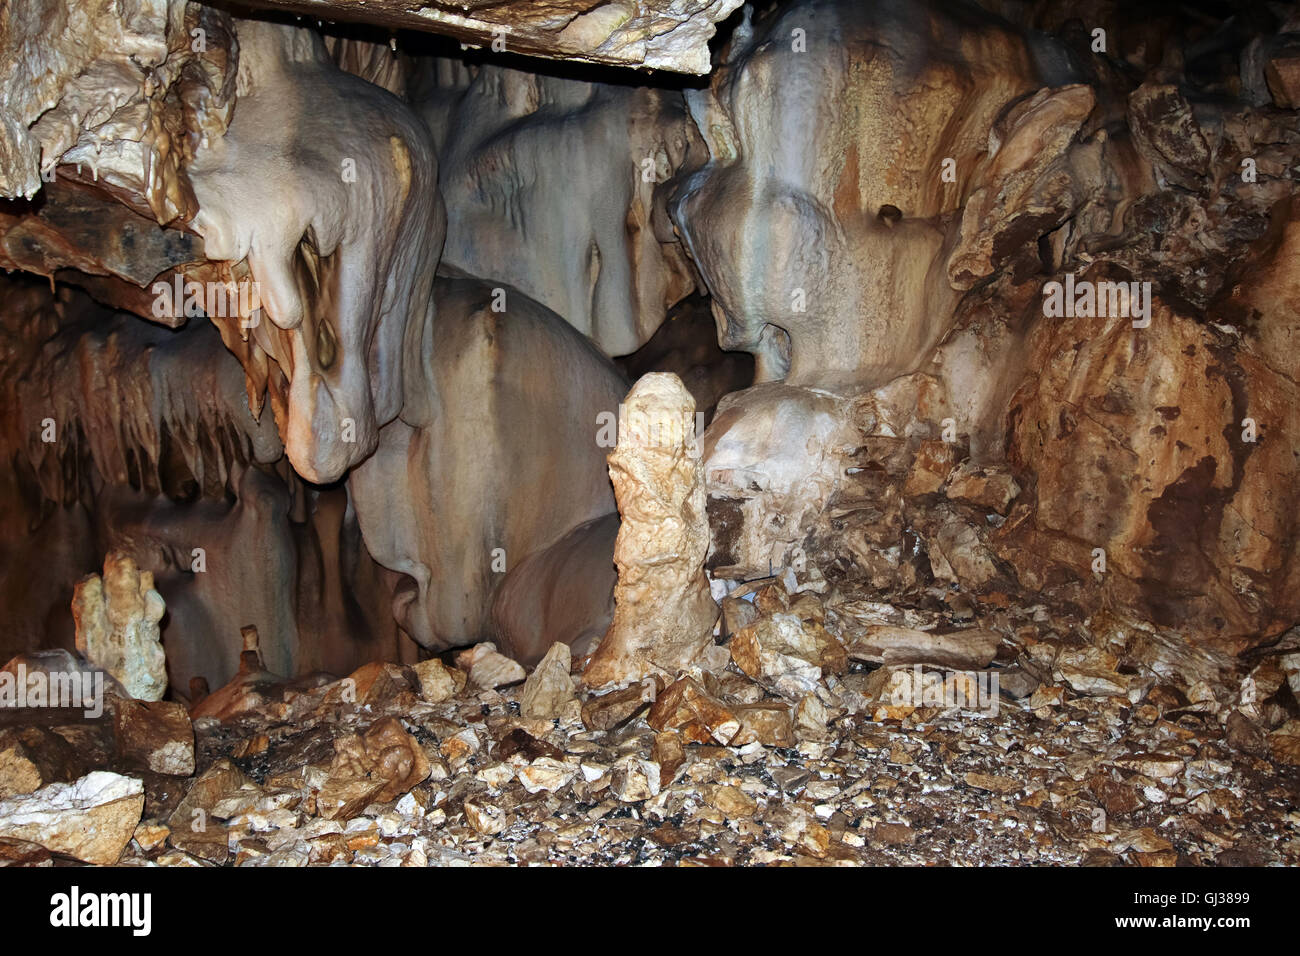 Bizarre mineral formations in a stalactite cave Stock Photo